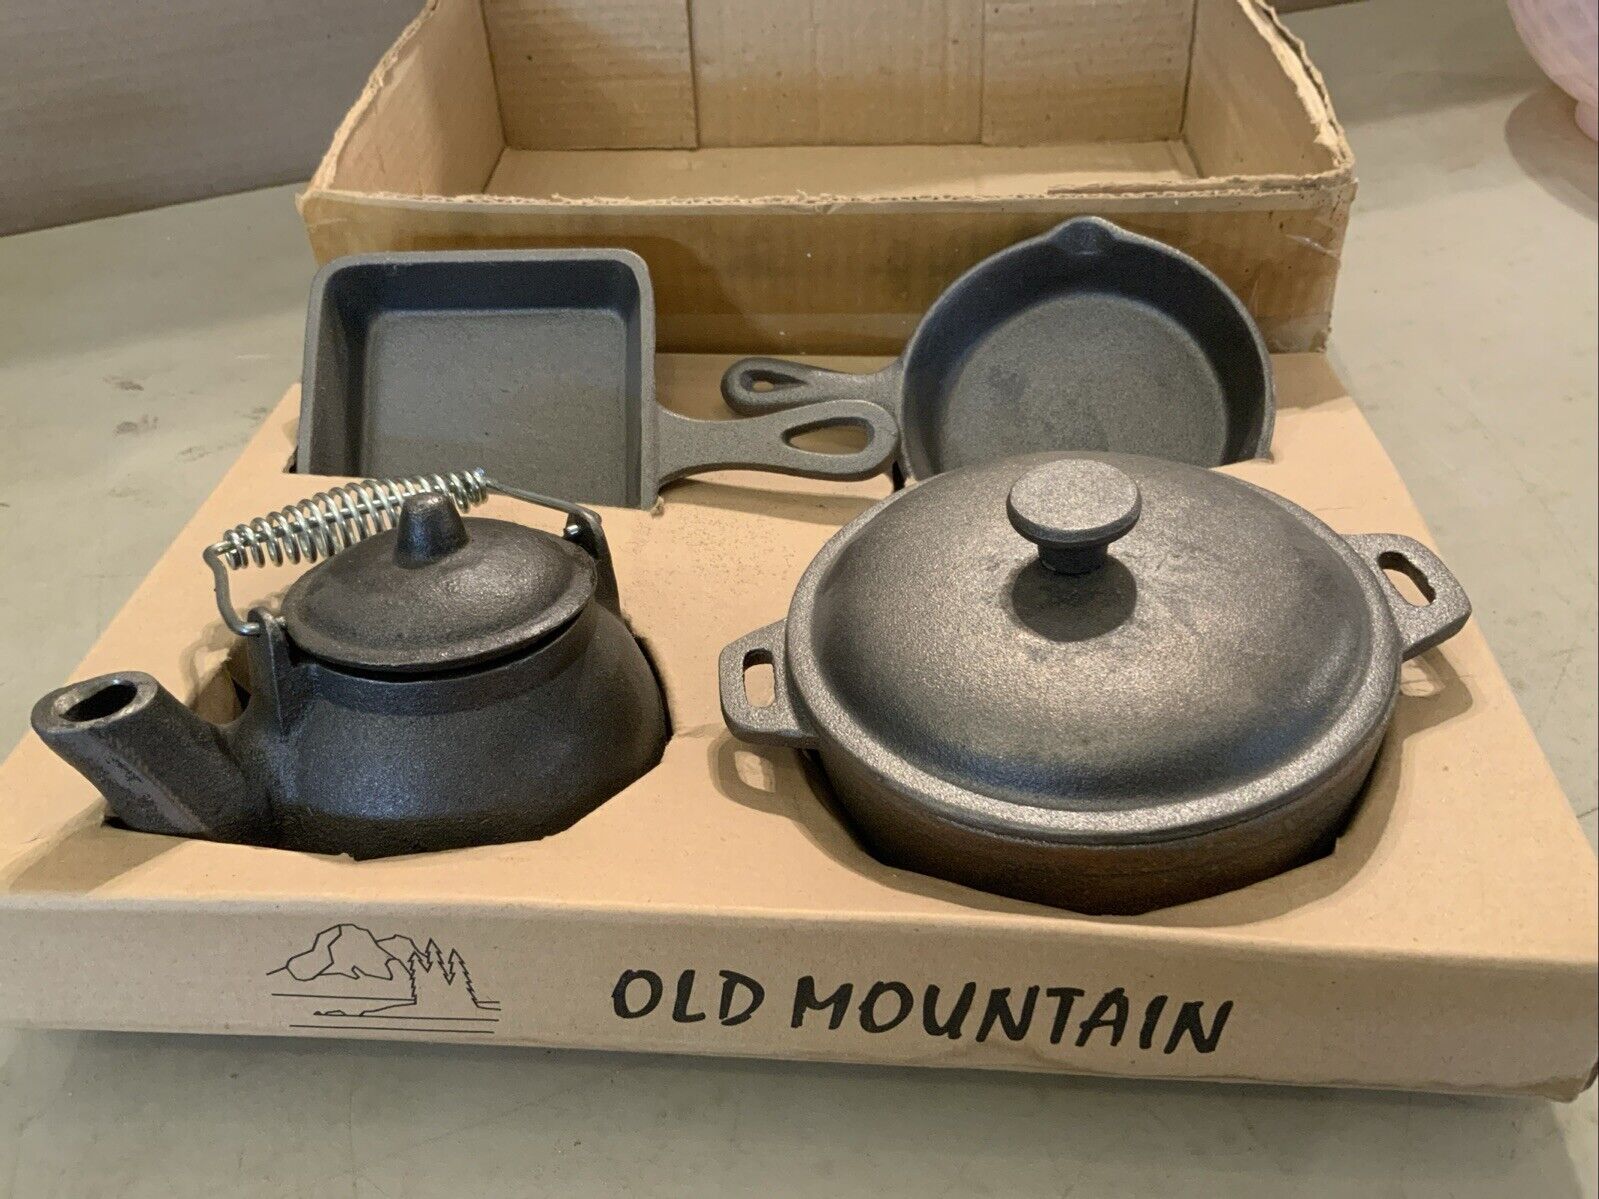 NEW IN BOX OLD MOUNTAIN CAST IRON CHILDS SET DUTCH OVEN SKILLET TEA POT